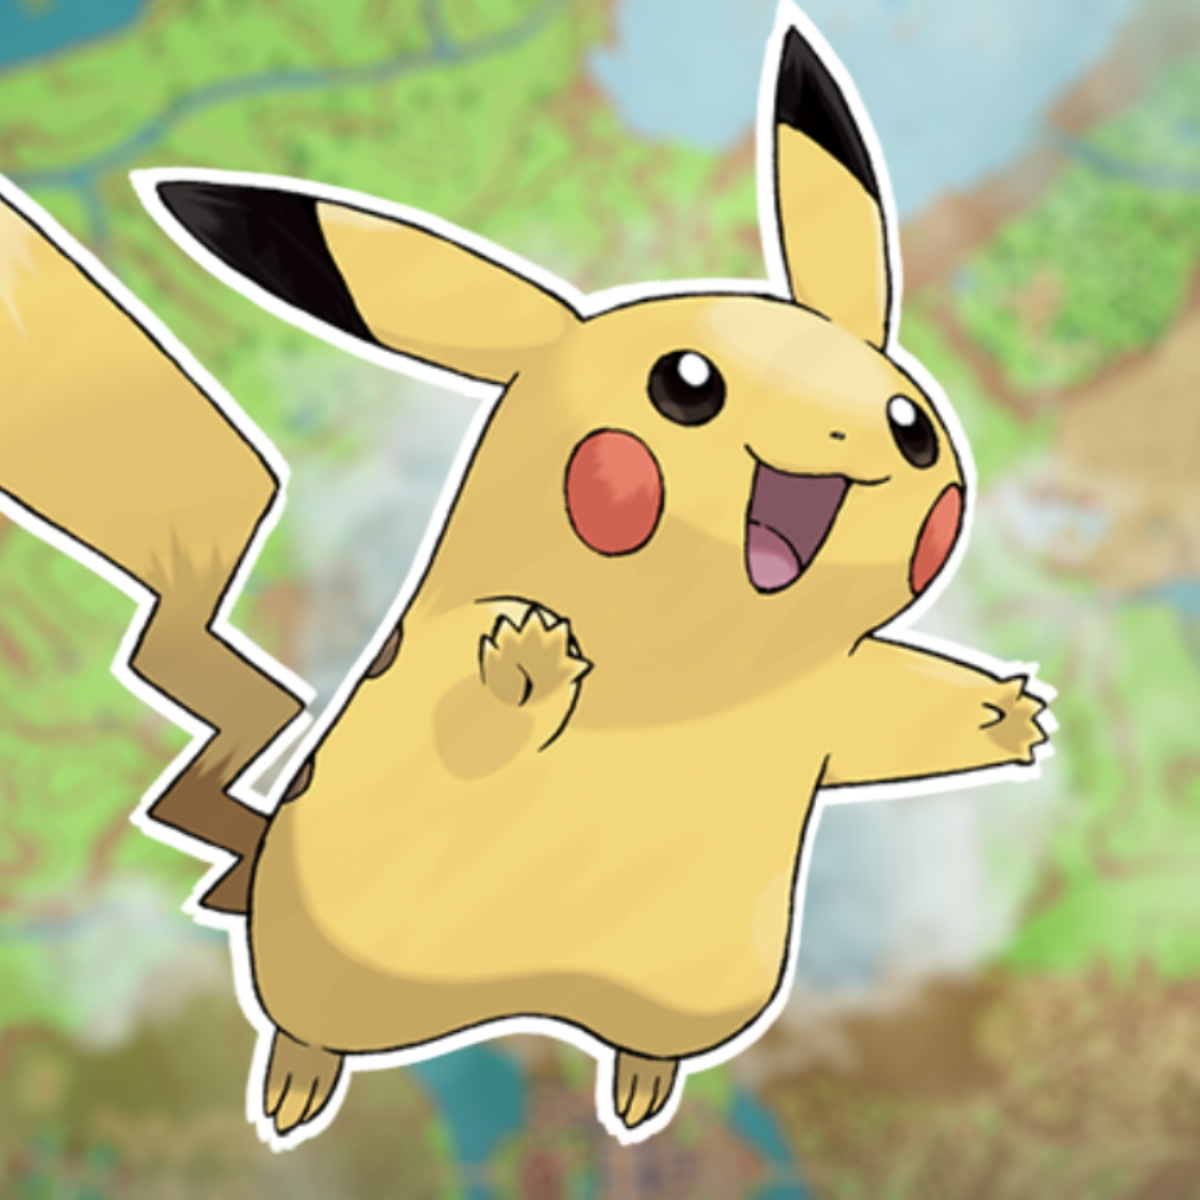 How to get Pikachu in Pokémon Scarlet and Violet